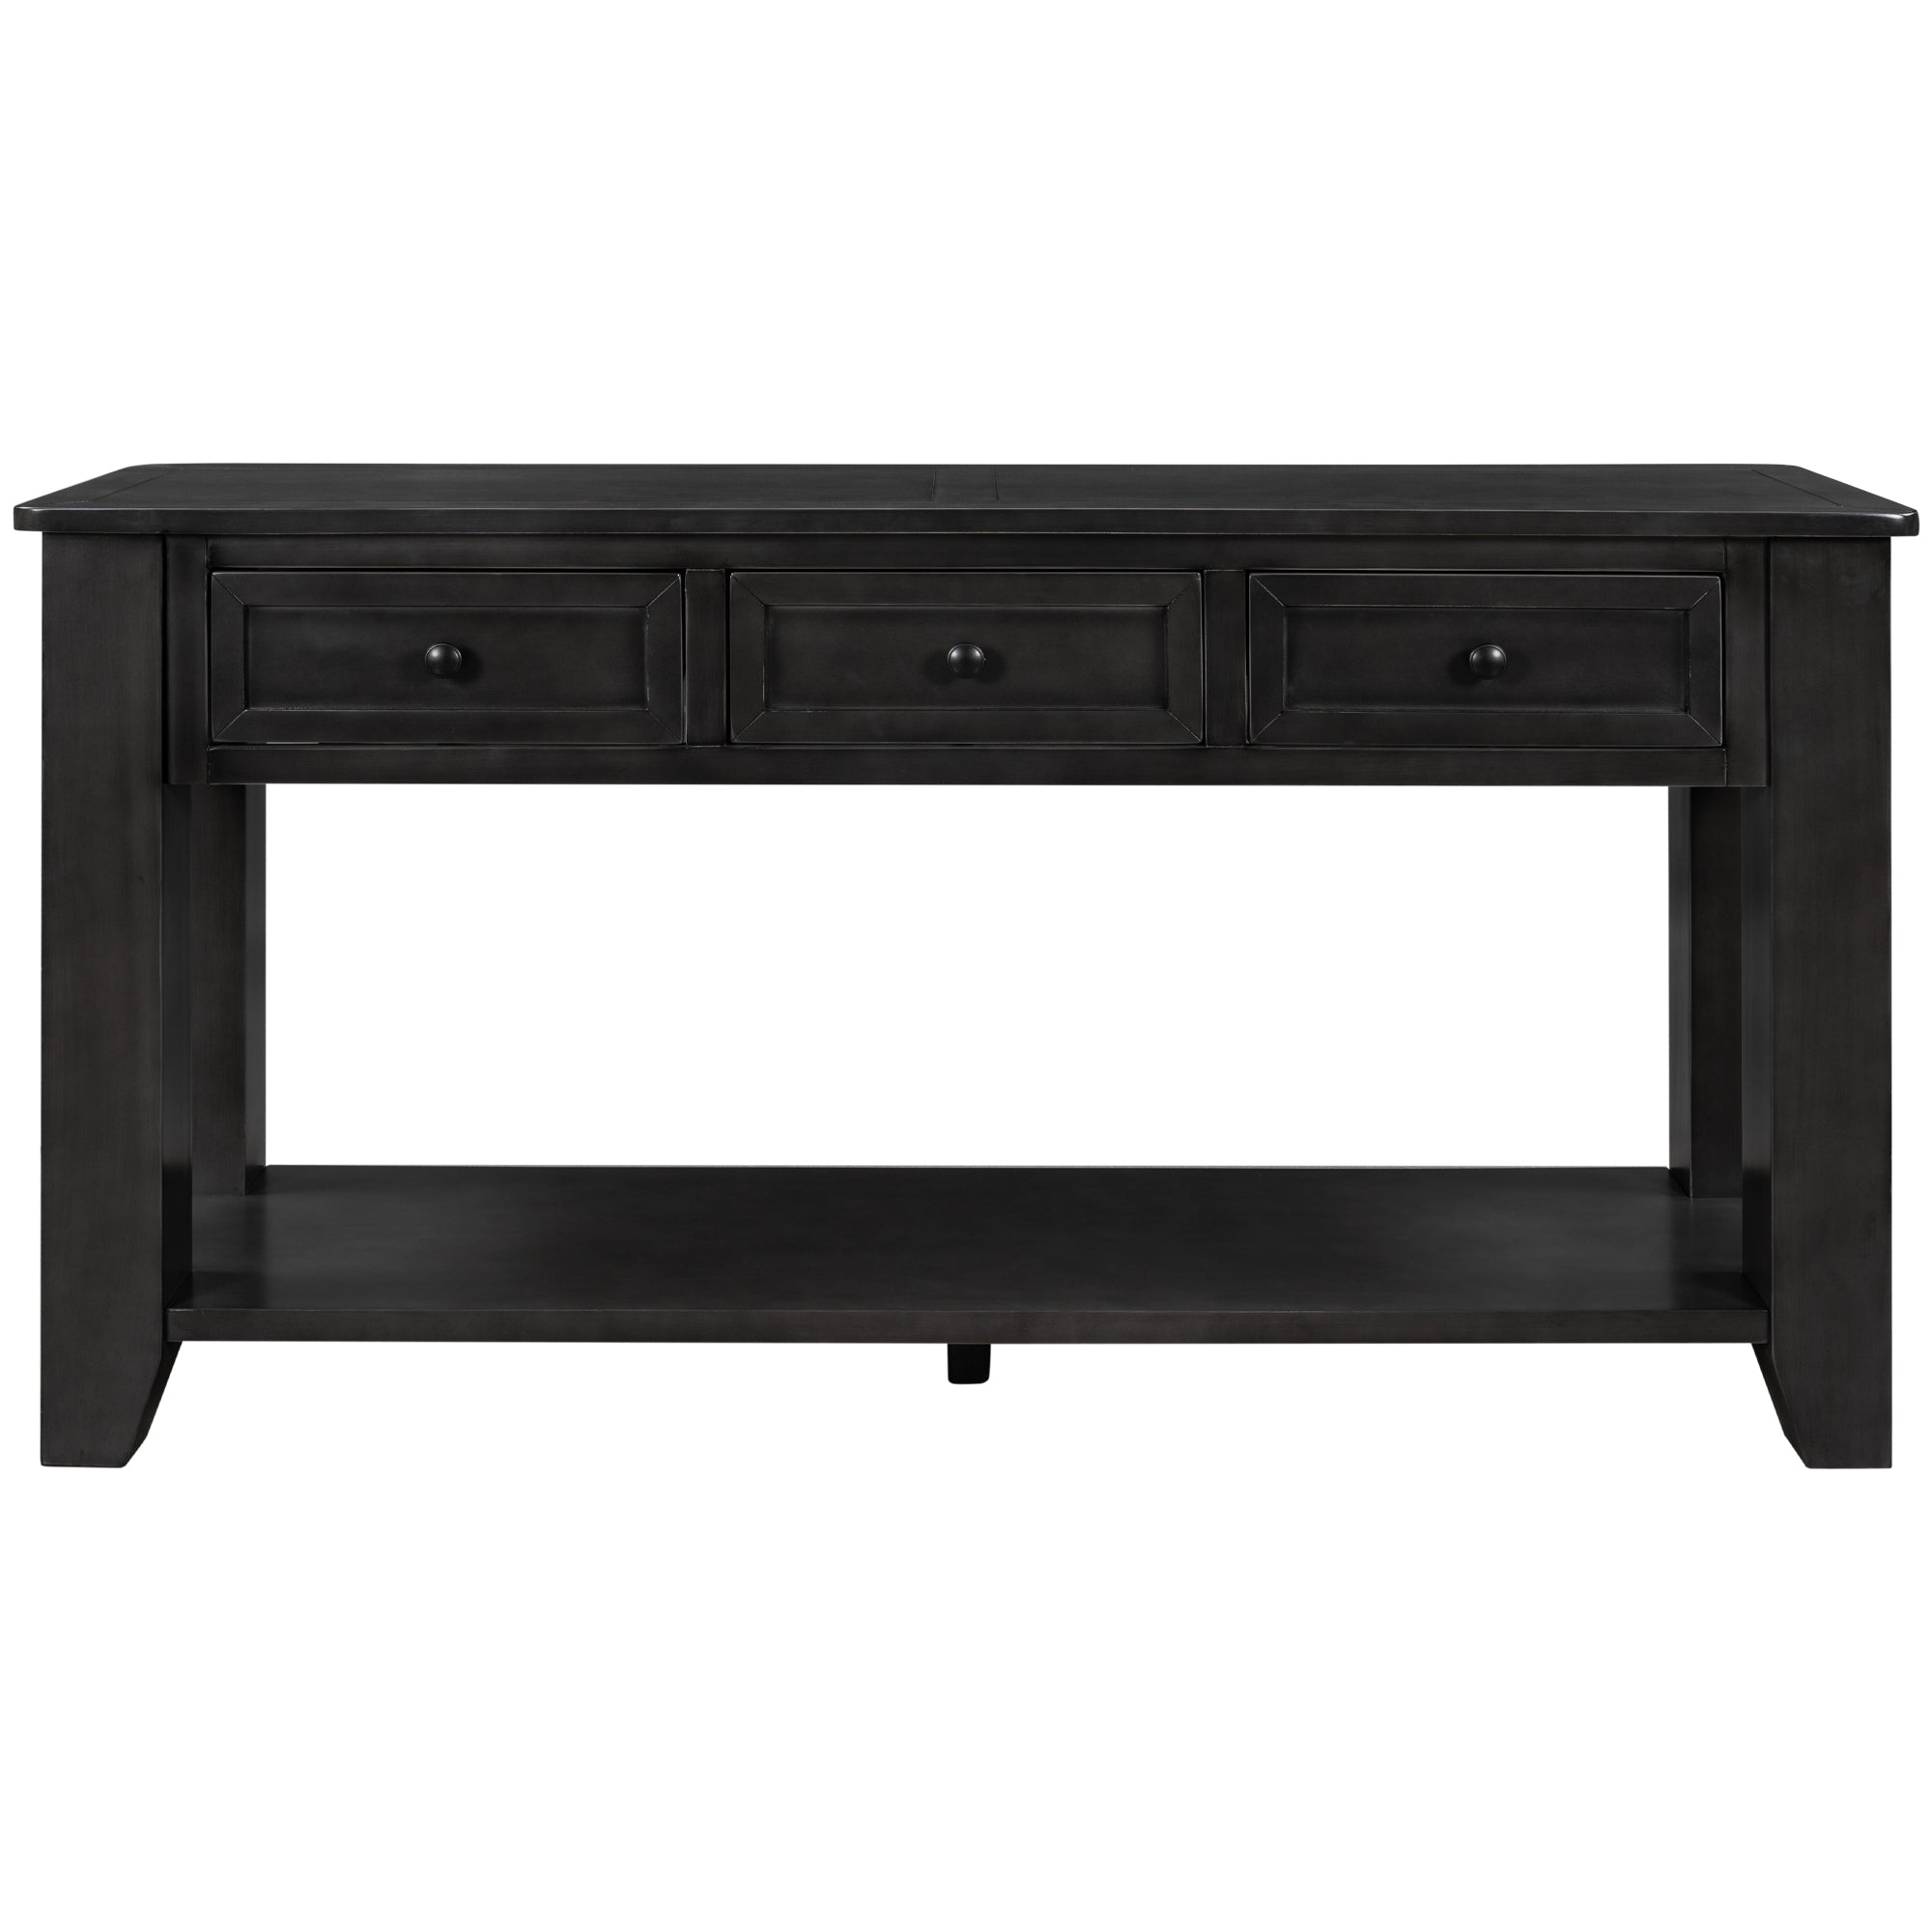 U STYLE 55'' Modern Console Table Sofa Table for black-solid wood